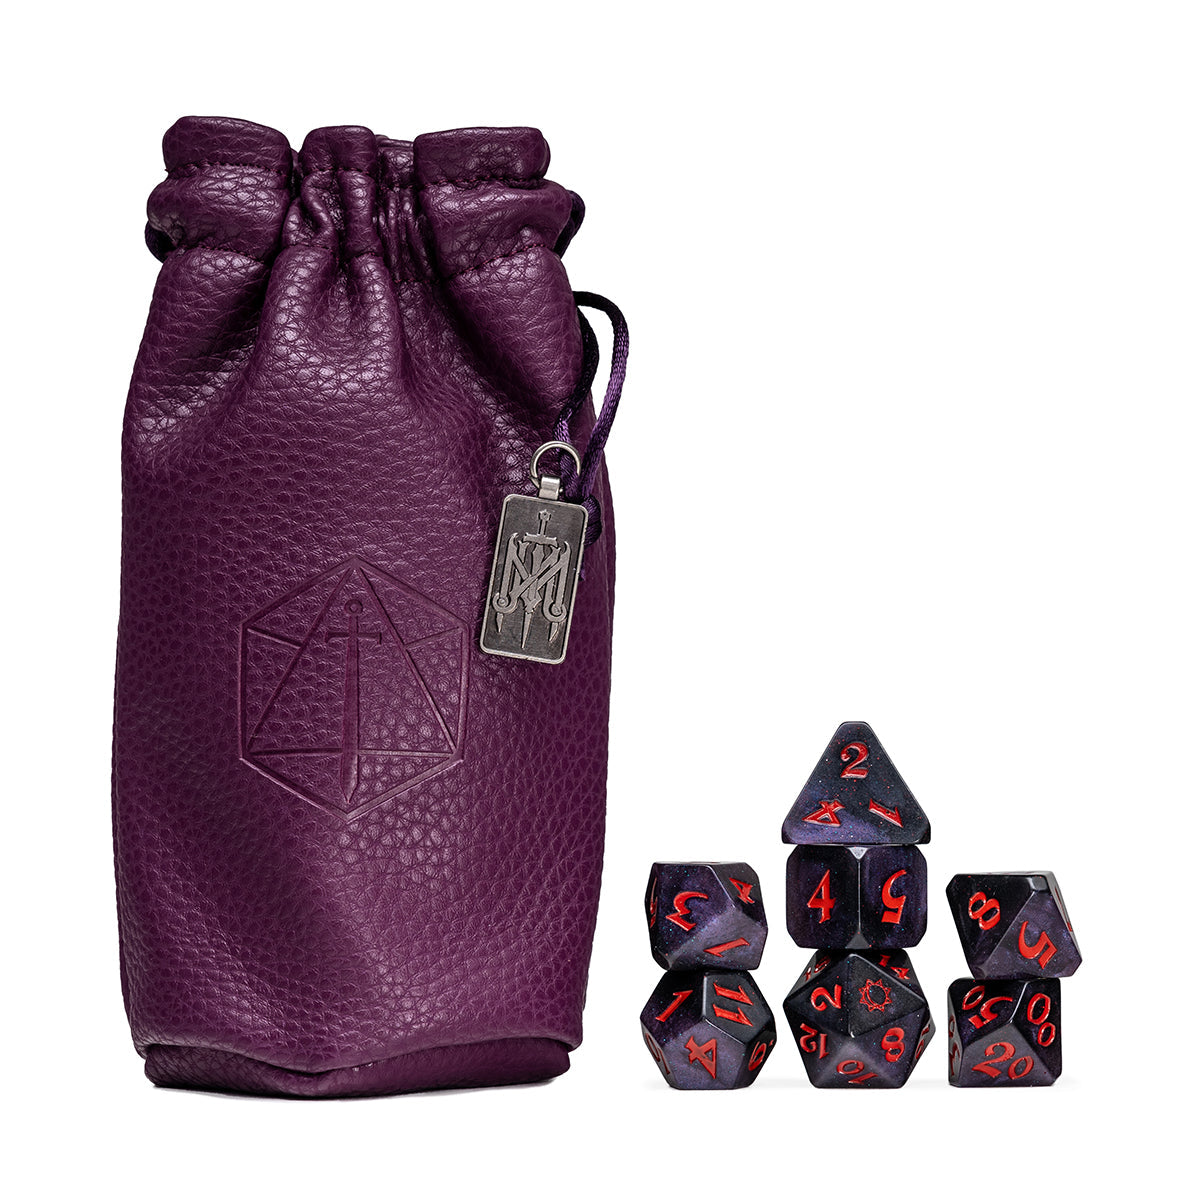 Mollymauk Tealeaf character inspired dice set and dice bag from Critical Role, campaign 2 Mighty Nein